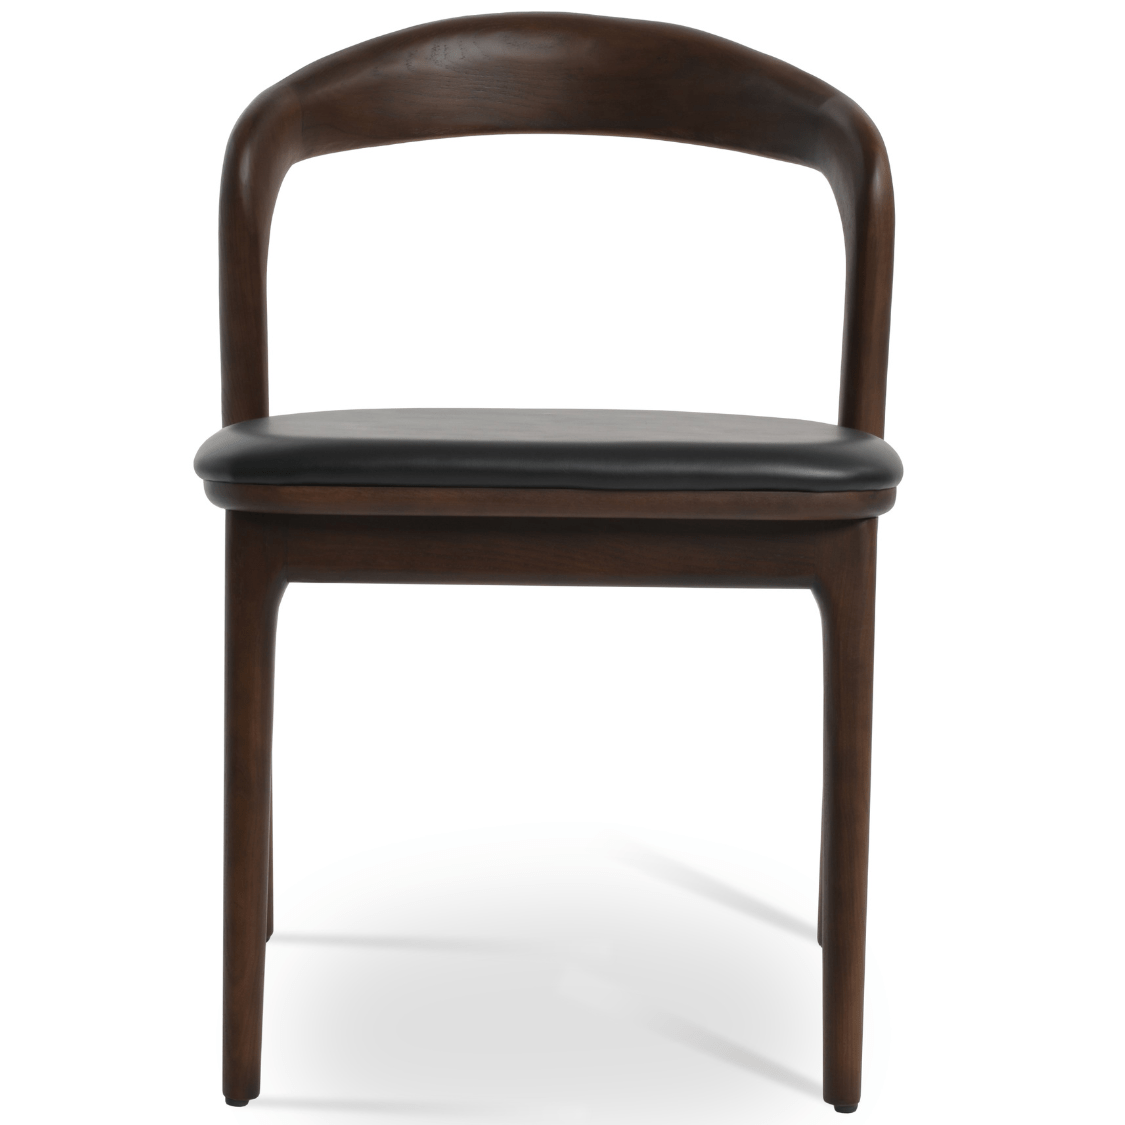 Infinity Wood Side Chair - Your Bar Stools Canada